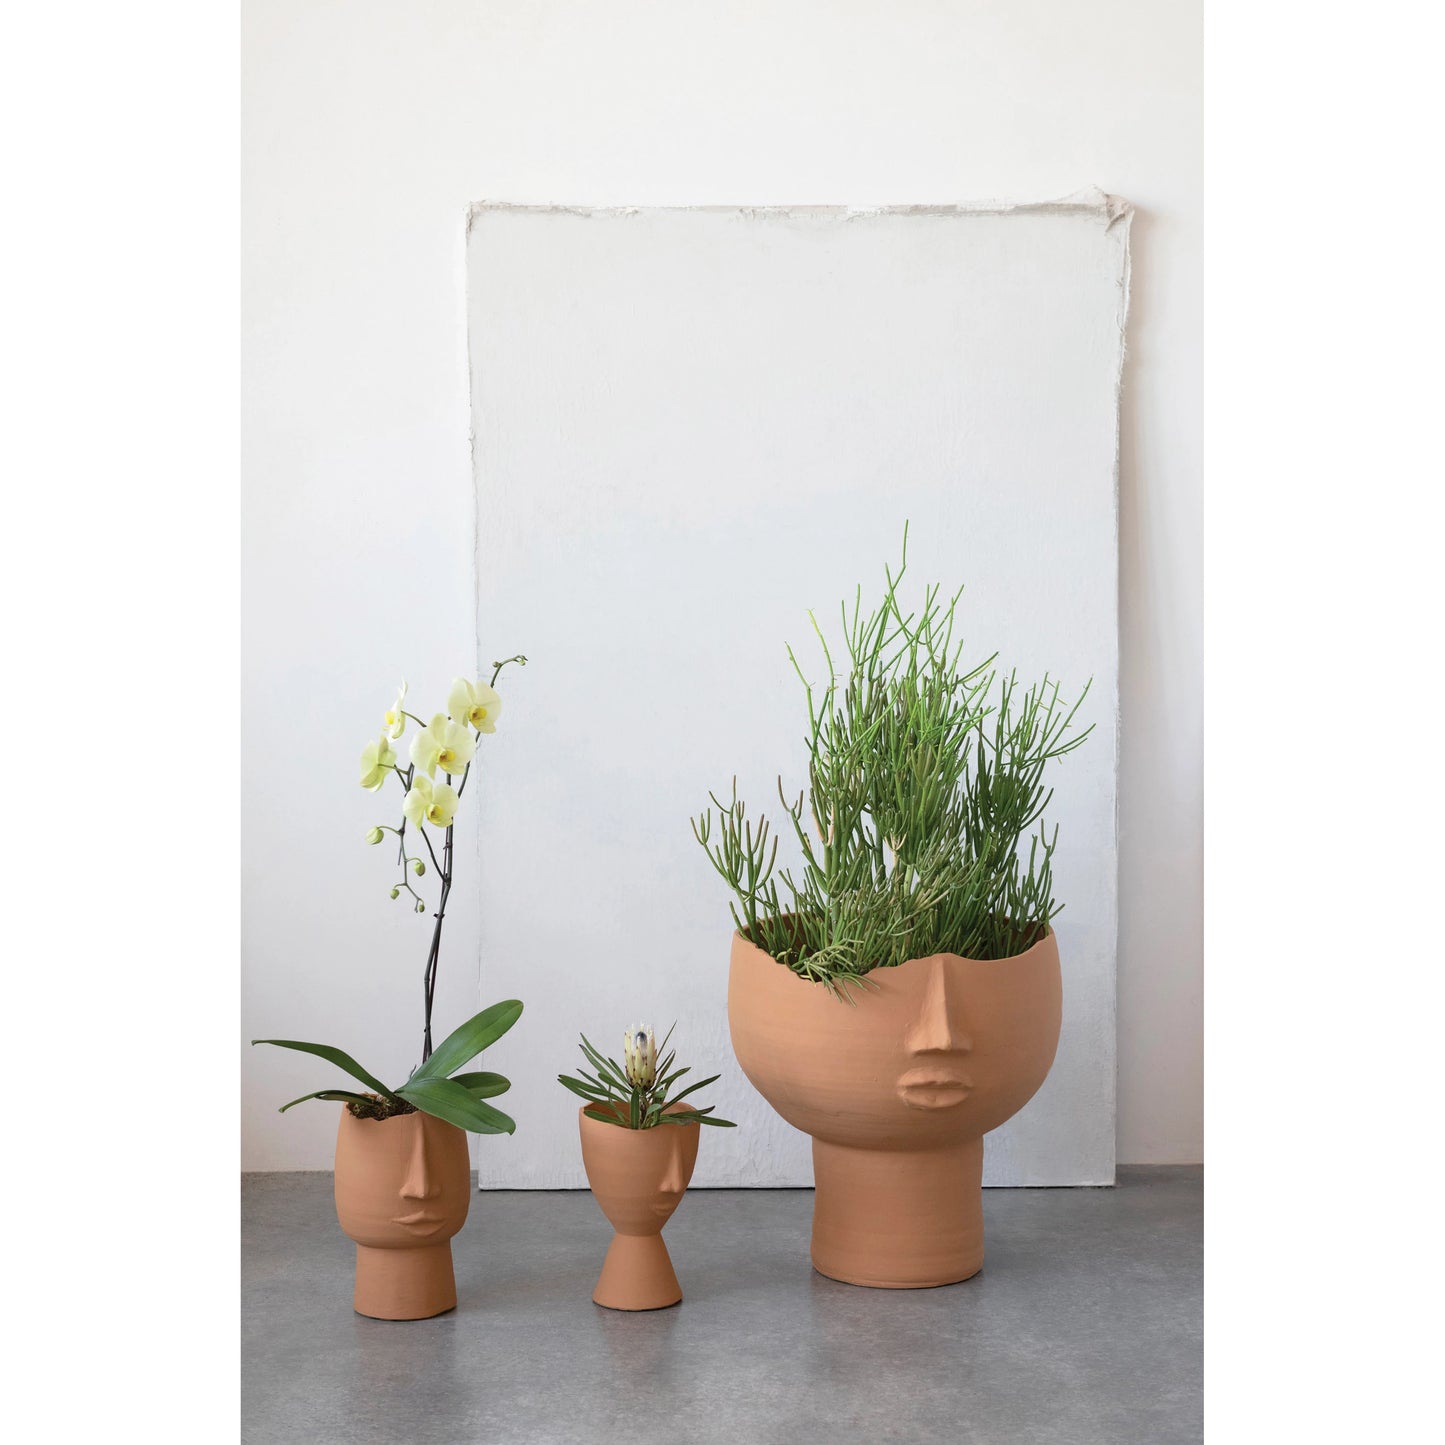 both styles of terracotta planters with faces displayed with flowers and succulents against a white wall and a very large terracotta face planter.